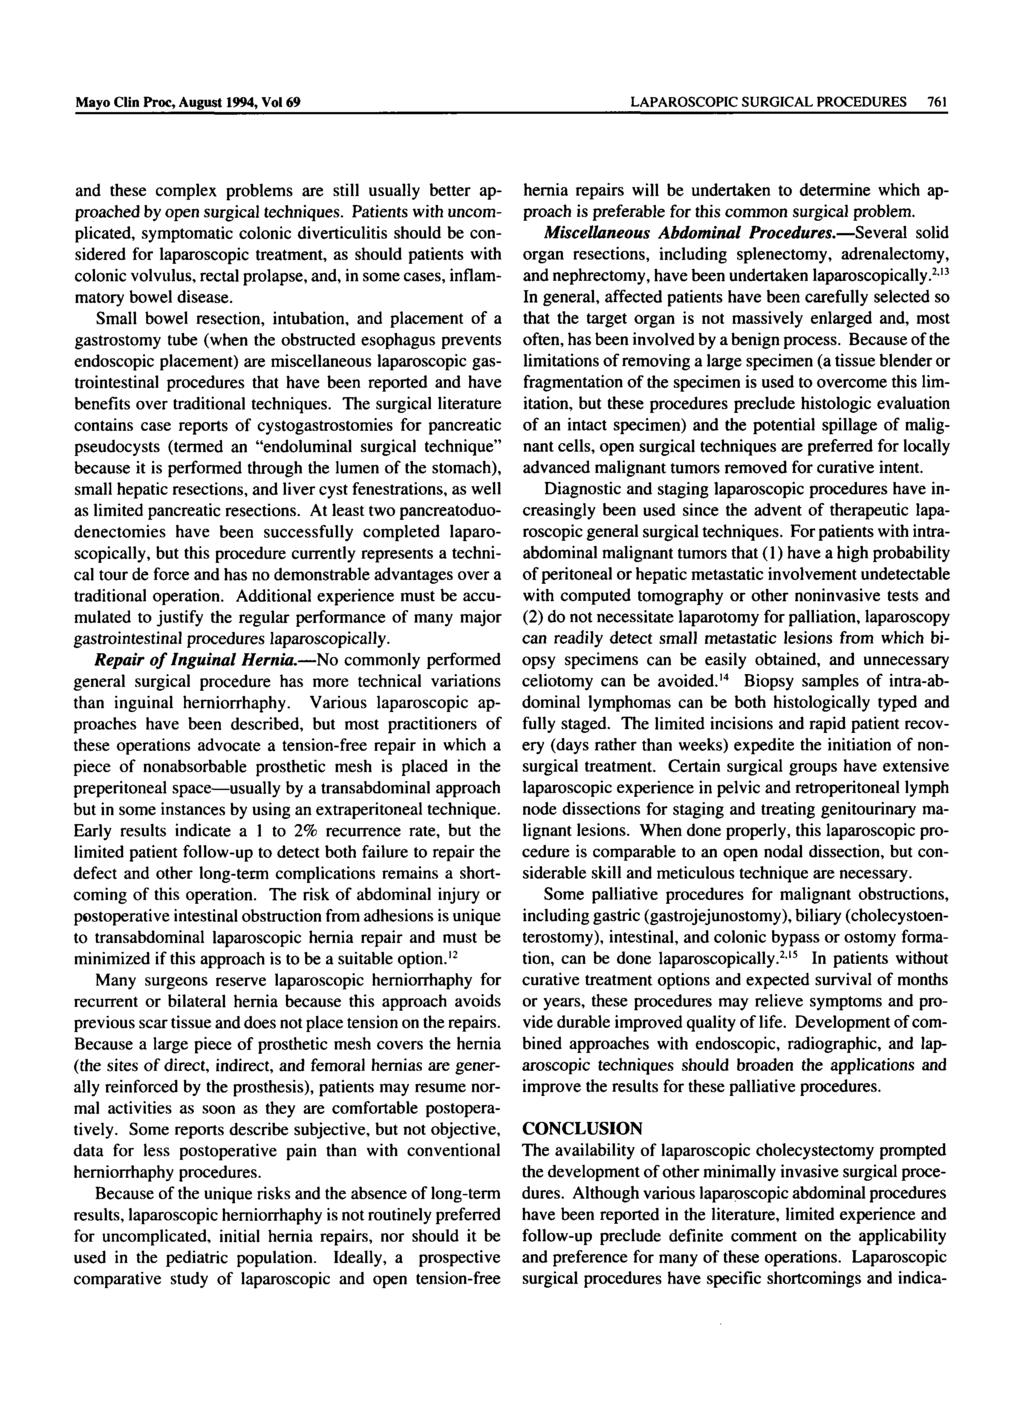 Mayo Clin Proc, August 1994, Vol 69 LAPAROSCOPIC SURGICAL PROCEDURES 761 and these complex problems are still usually better approached by open surgical techniques.